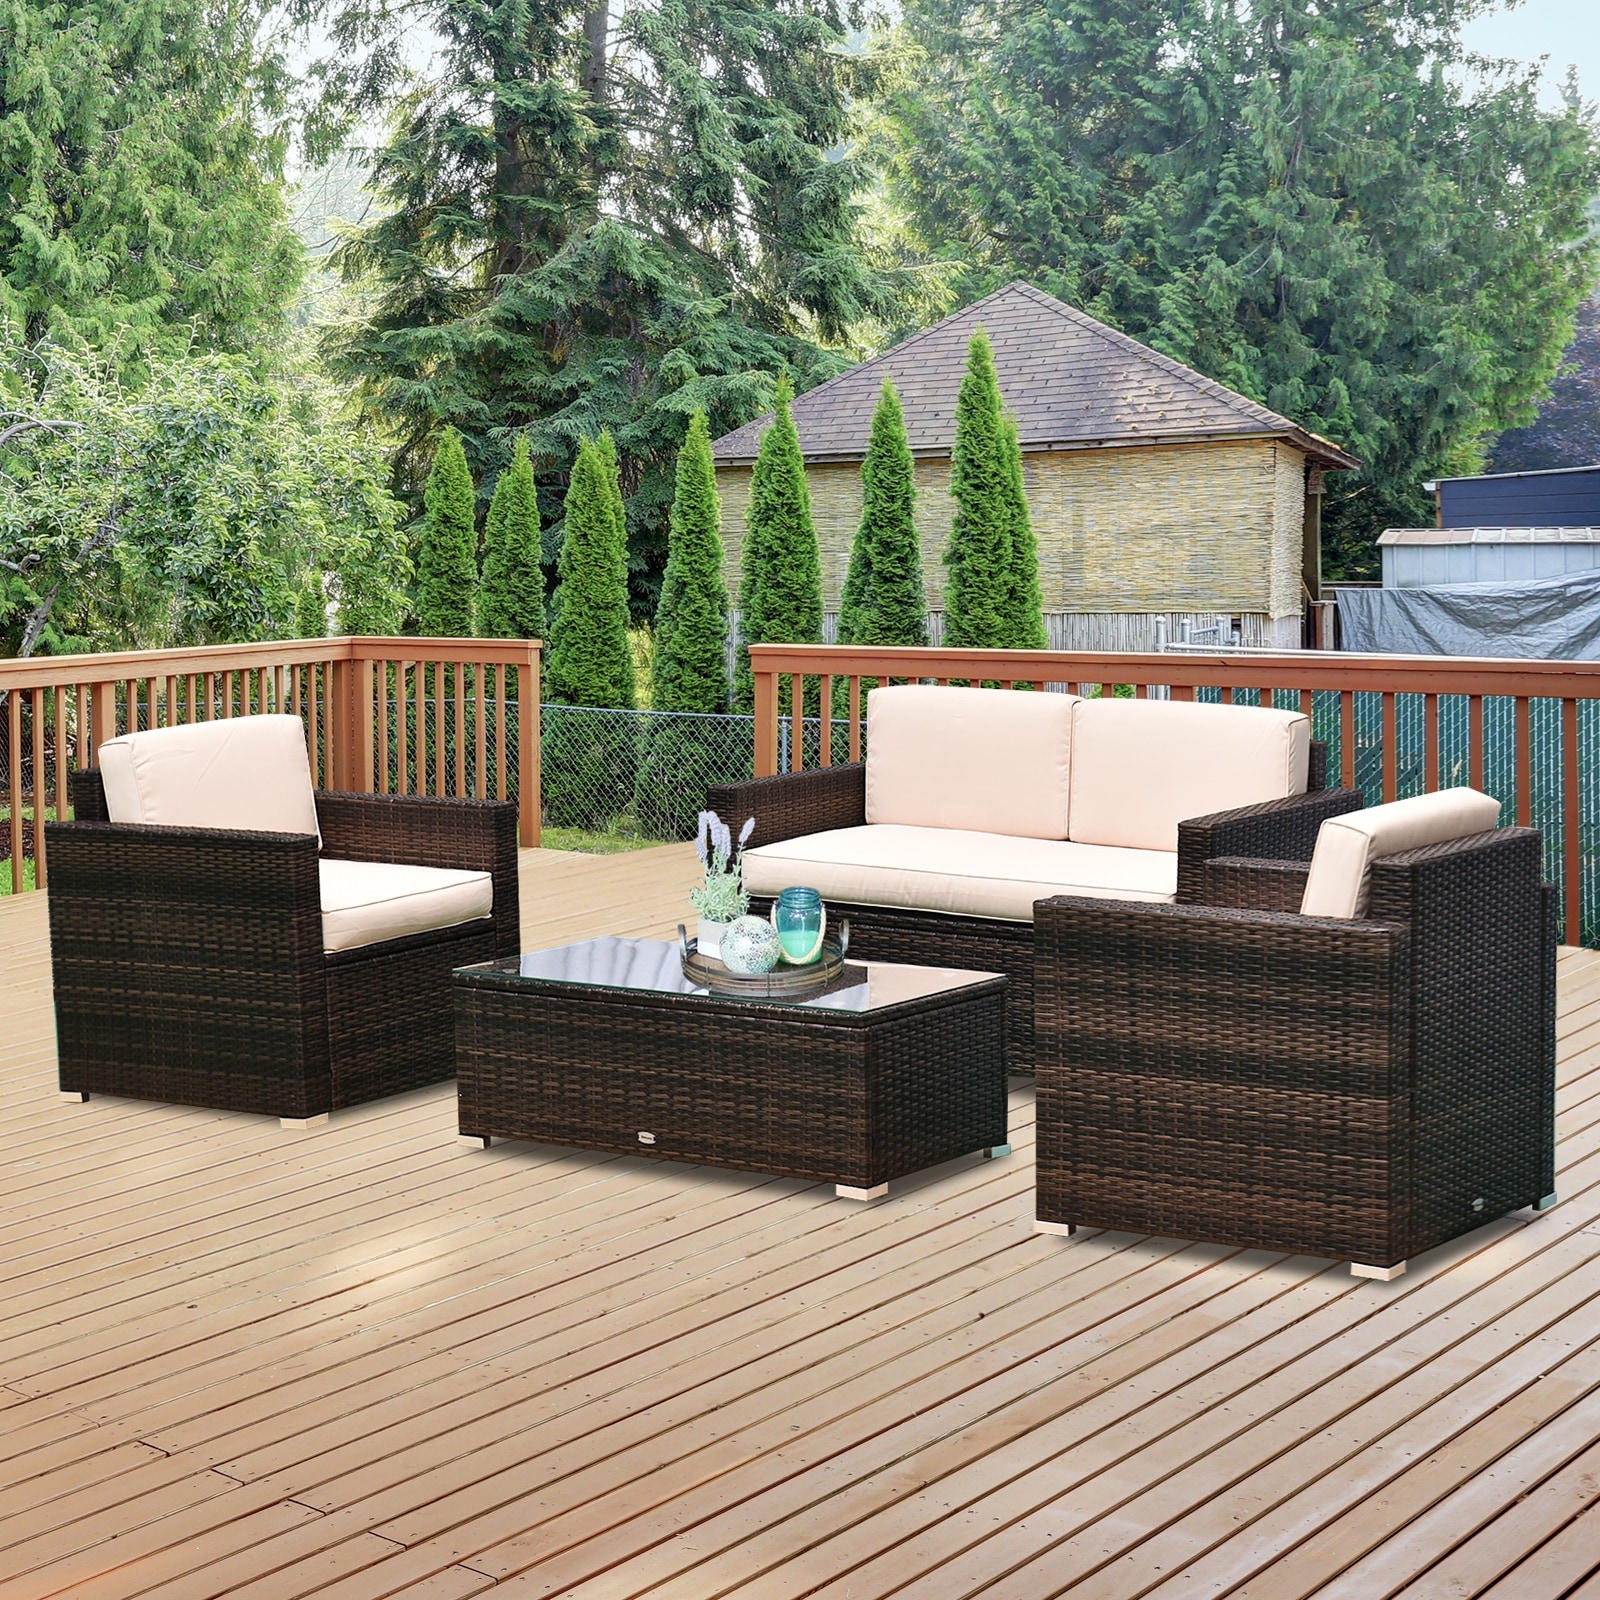 Outsunny 4 Piece Cushioned Patio Furniture Set, With 2 Chairs, Loveseat, And Glass Coffee Table, Rattan Wicker, Brown